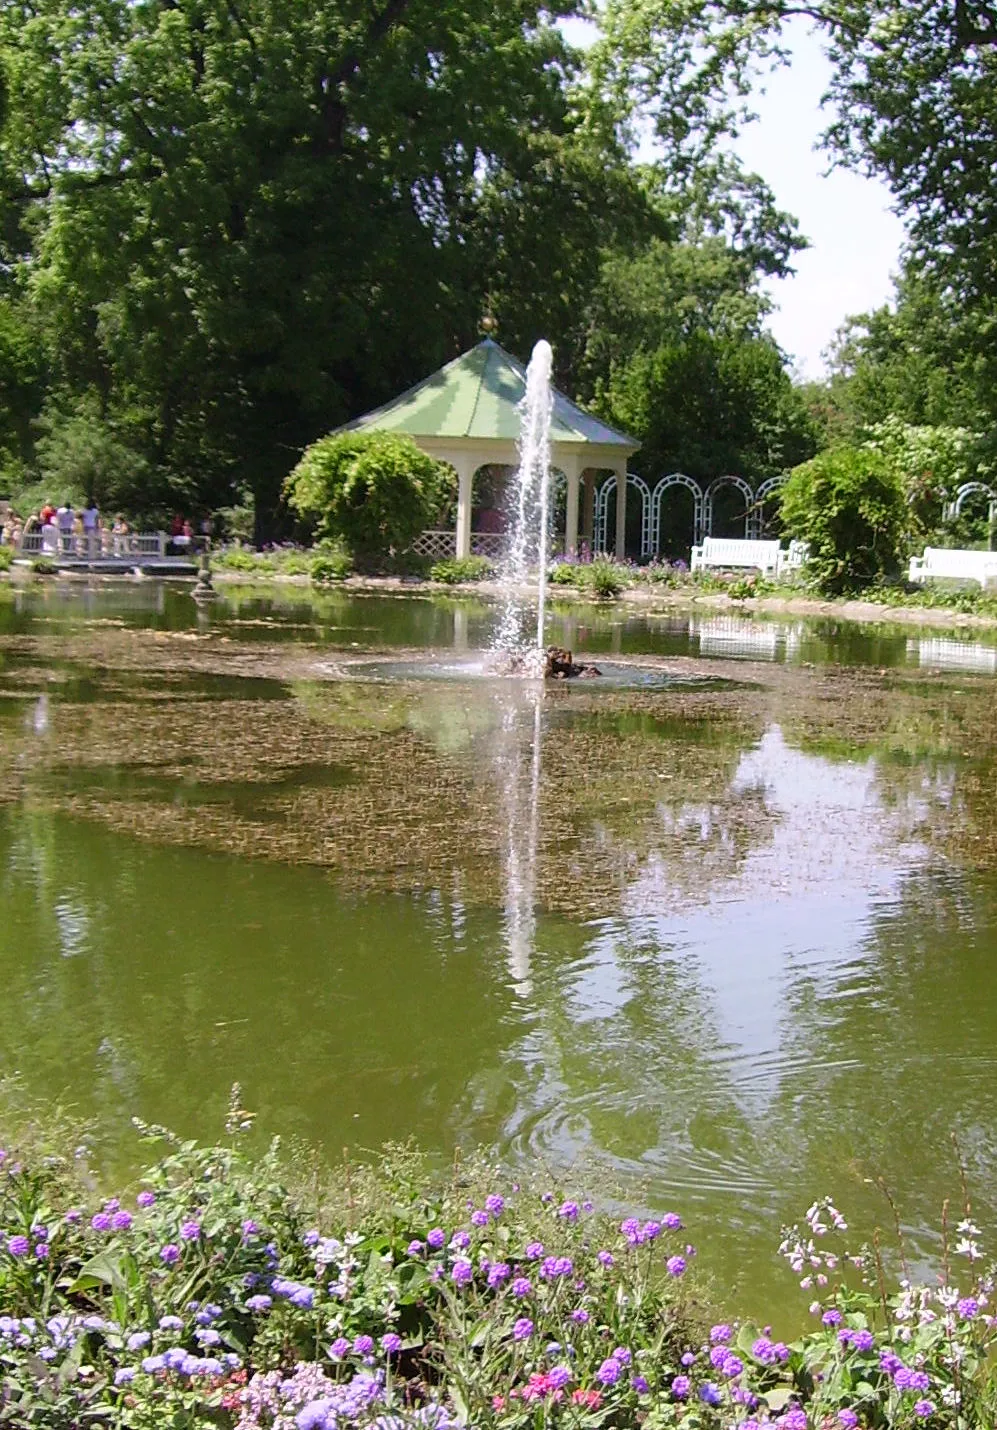 Photo showing: Fountain in the Märchengarten (fairy tale garden), at the gardens of Schloss Ludwigsburg — in Ludwigsburg, Germany.